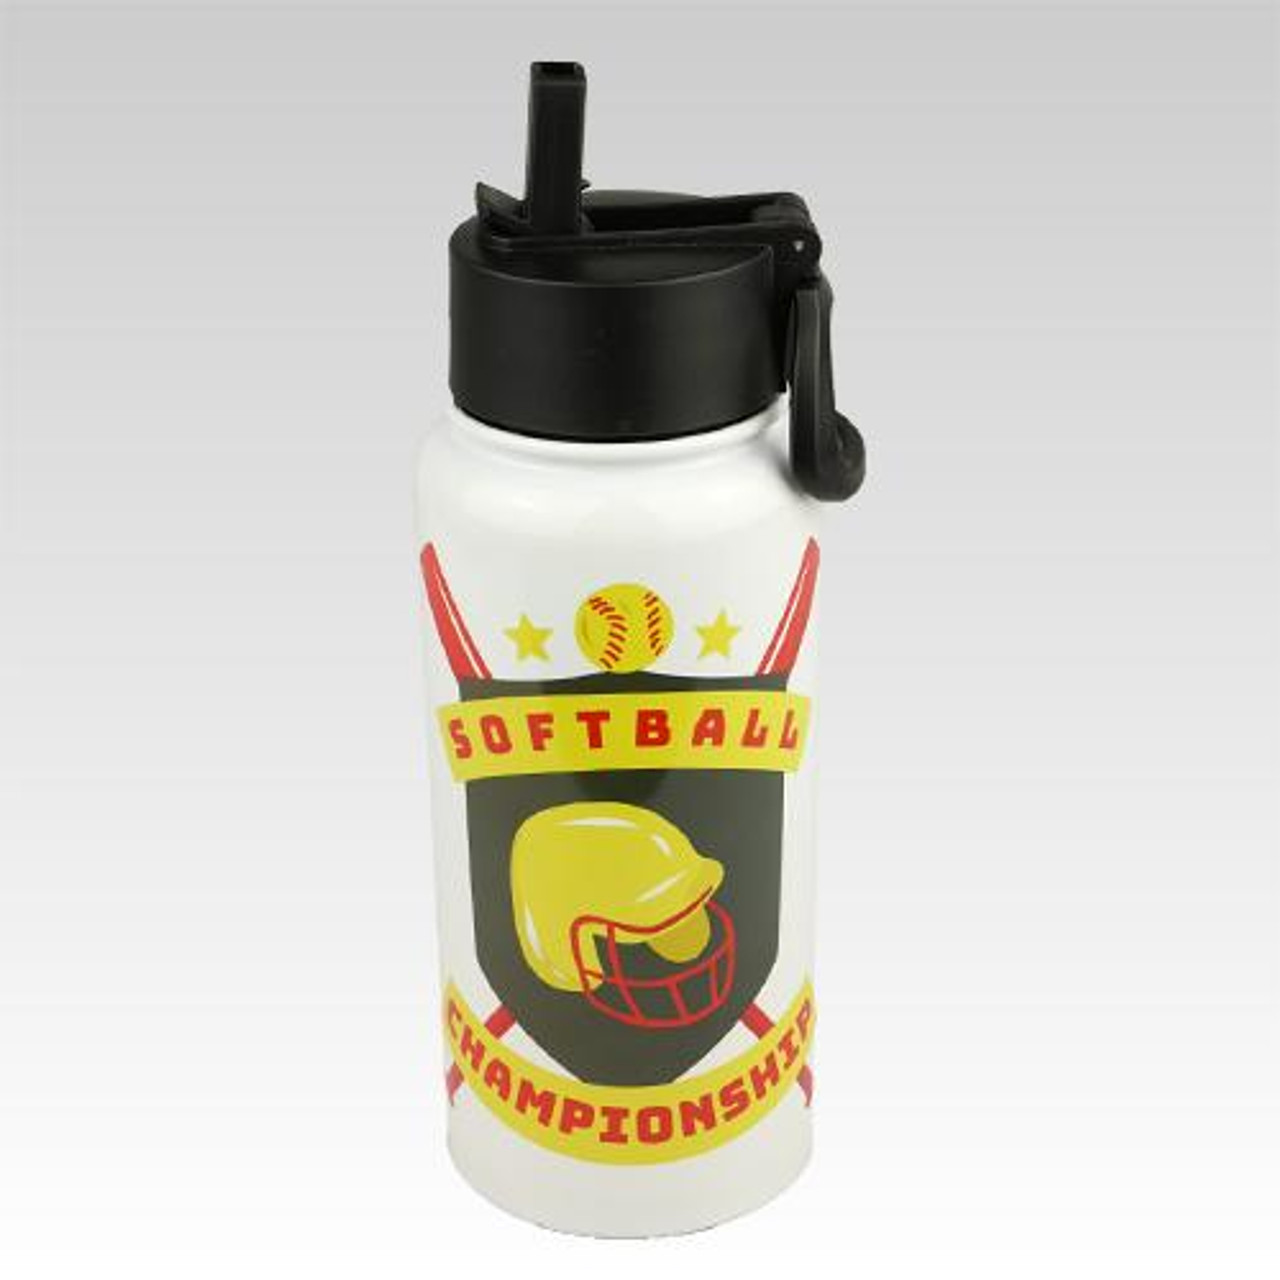 BLANK WATER BOTTLE for SUBLIMATION or HEAT PRESS by WRMK and